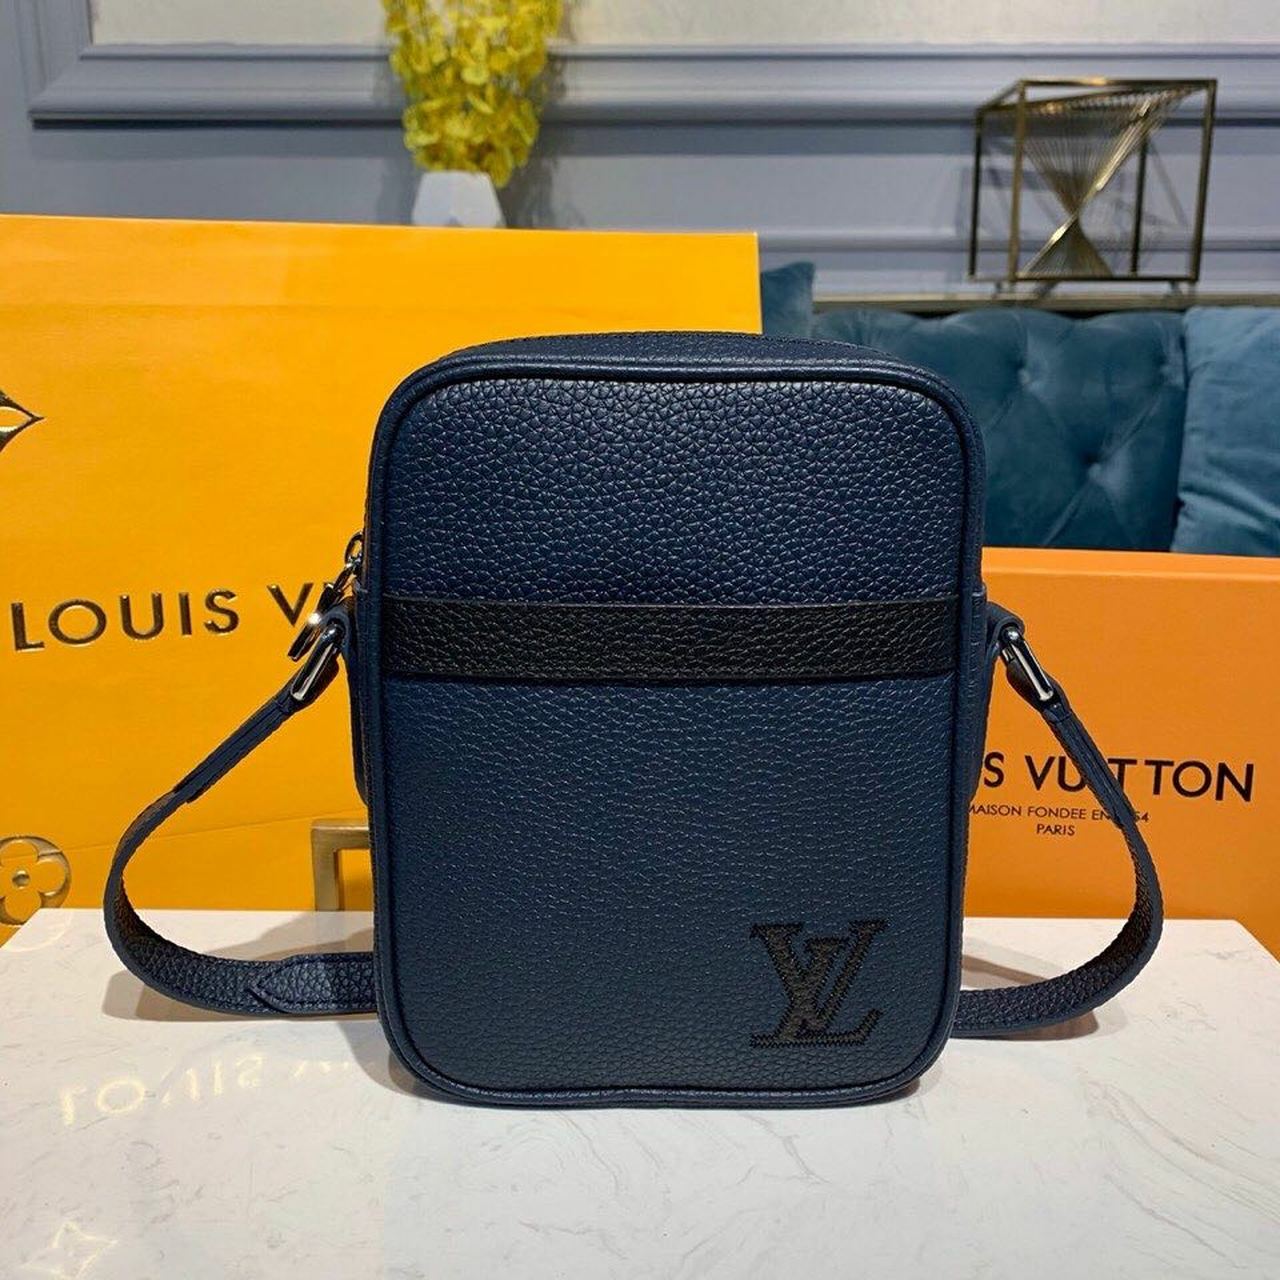 Louis Vuitton Danube Slim PM City Bag 21cm Taurillon Leather Spring/Summer  2019 Collection M55168, Navy